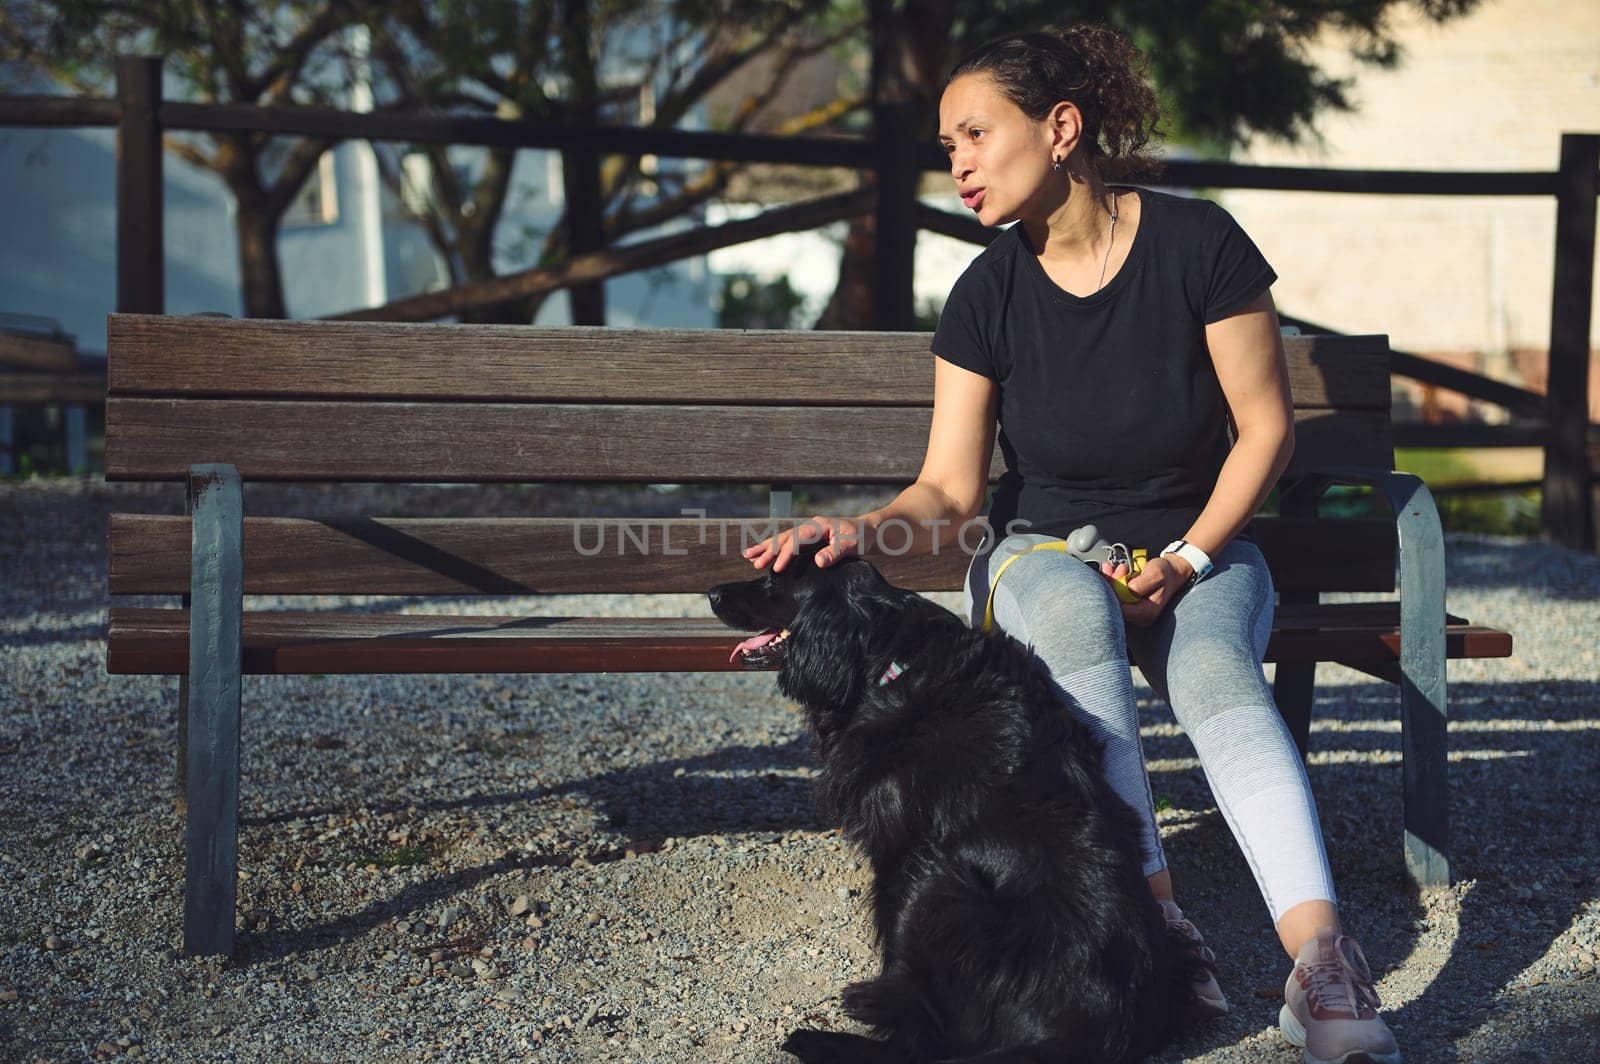 Authentic portrait of a pretty woman ang her pet, a black cocker spaniel on the bench on the nature outdoors. Woman walking dog by artgf